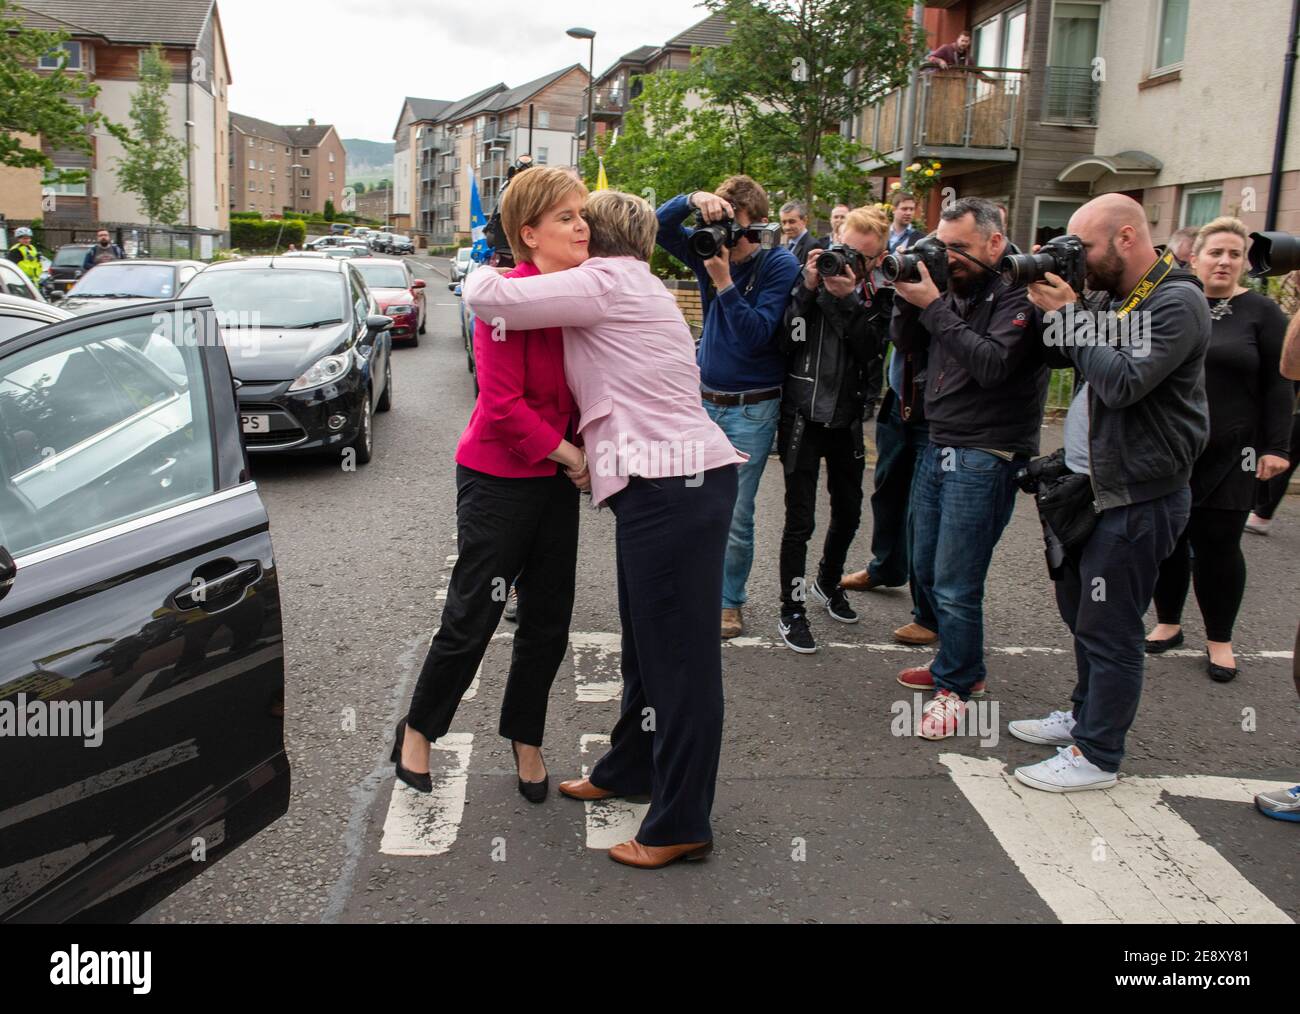 Picture Date - Thursday 1st of June 2017: Original Caption - Nicola Sturgeon was met by Joanna Cherry at Oxgangs Neighbourhood Centre. First Minister Nicola Sturgeon said that with seven days to go until the election on June 8th, voters in Scotland face a clear choice between the SNP who want a strong voice for Scotland or the Tories who want to silence Scotland. Caption Update - Monday 1st of February 2021: Joanna Cherry has been dropped from the Scottish National Party's frontbench team at Westminster. The Edinburgh South West MP said she was sacked from the justice position 'despite hard wo Stock Photo